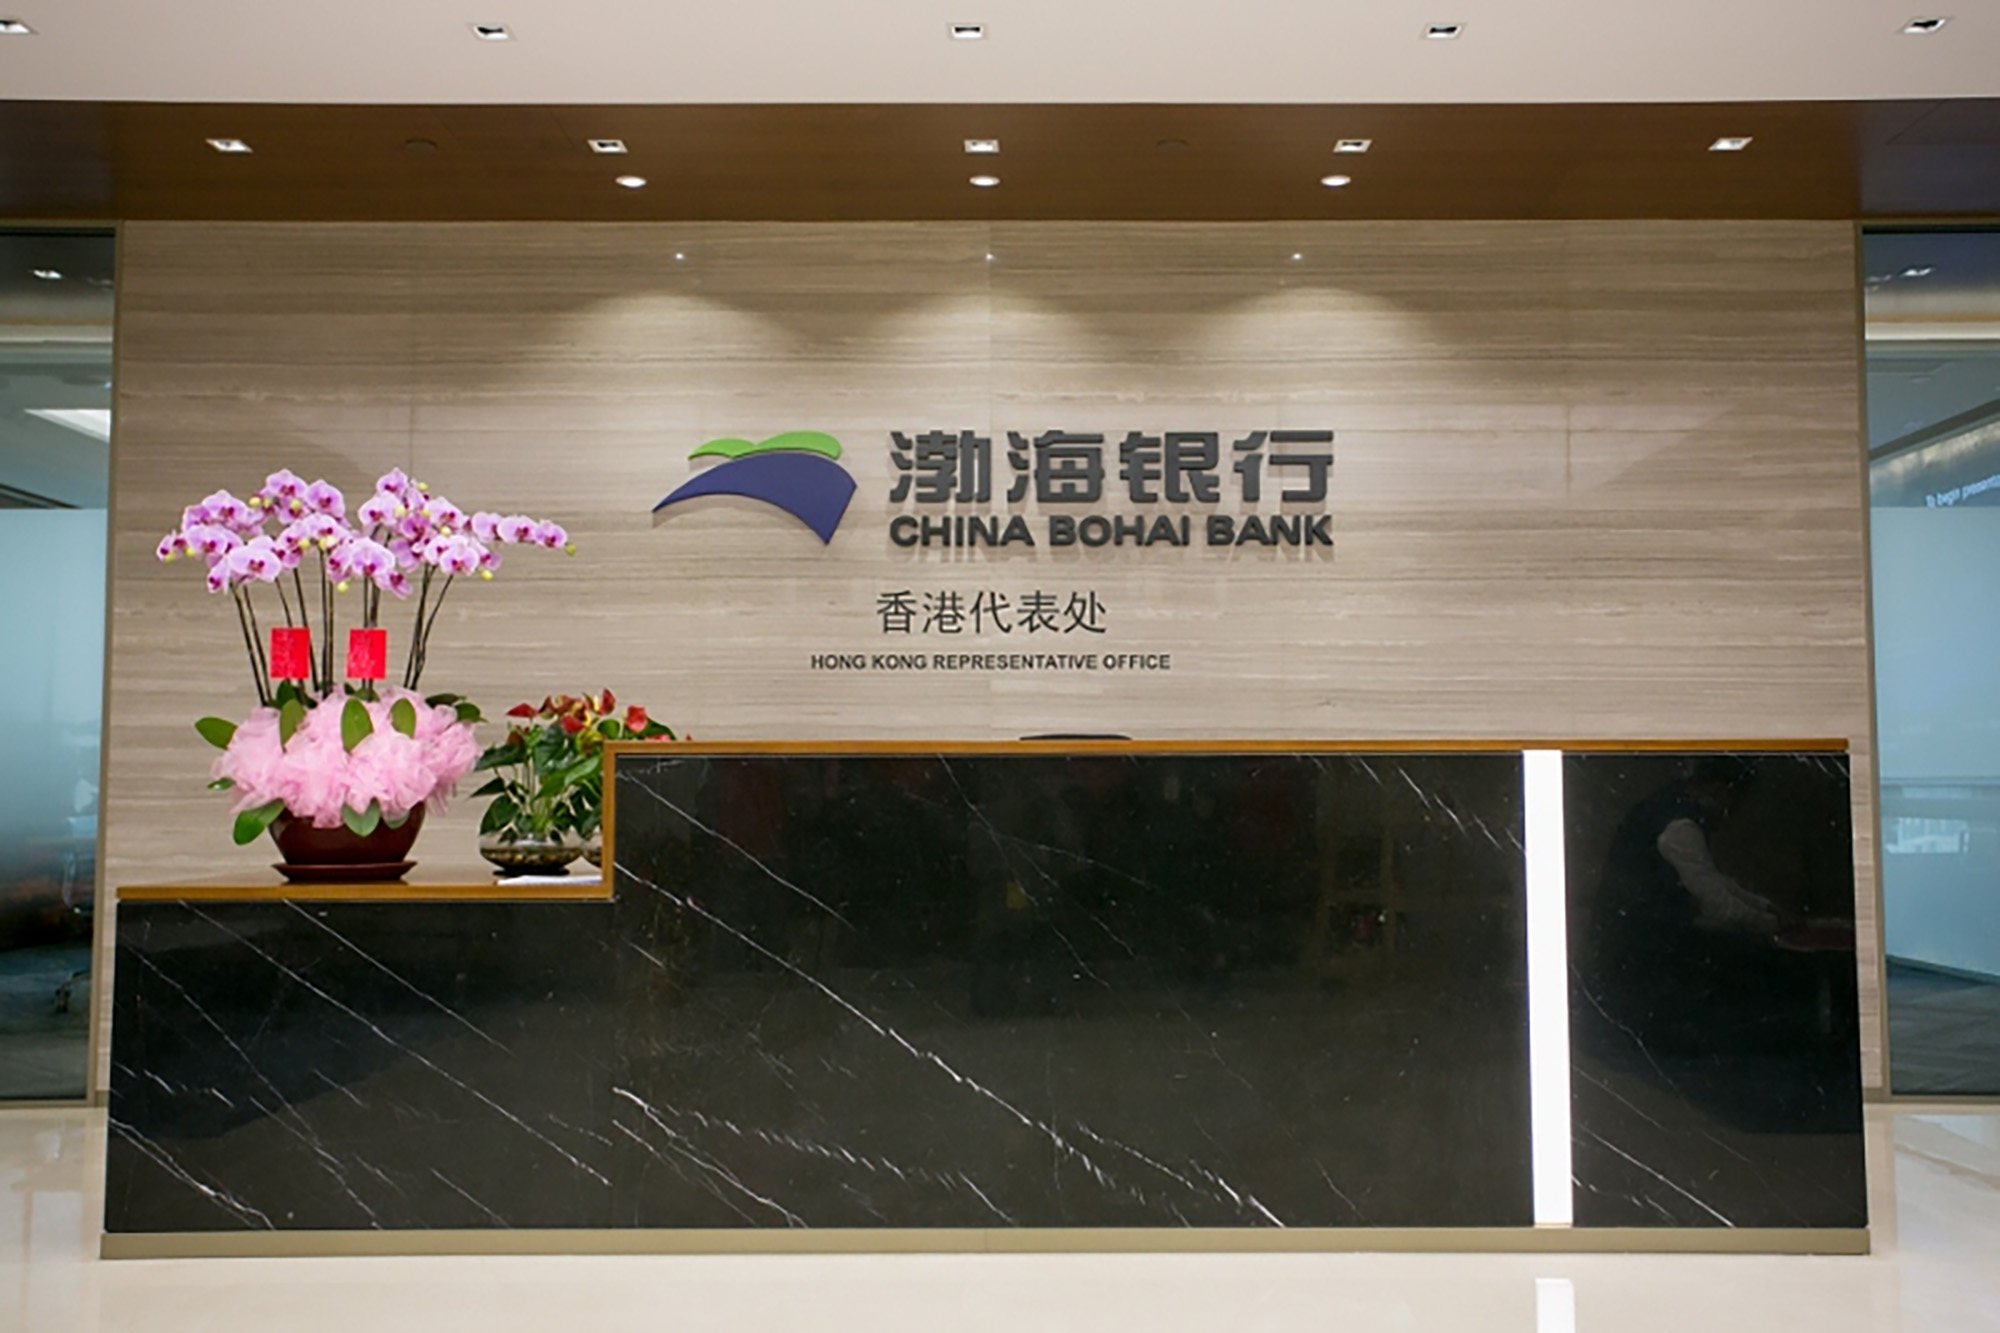 China Bohai Bank proposed to sell US$3.5 billion worth of assets at a discount to bidders including the nation’s bad debt managers via a public tender to shore up capital levels.